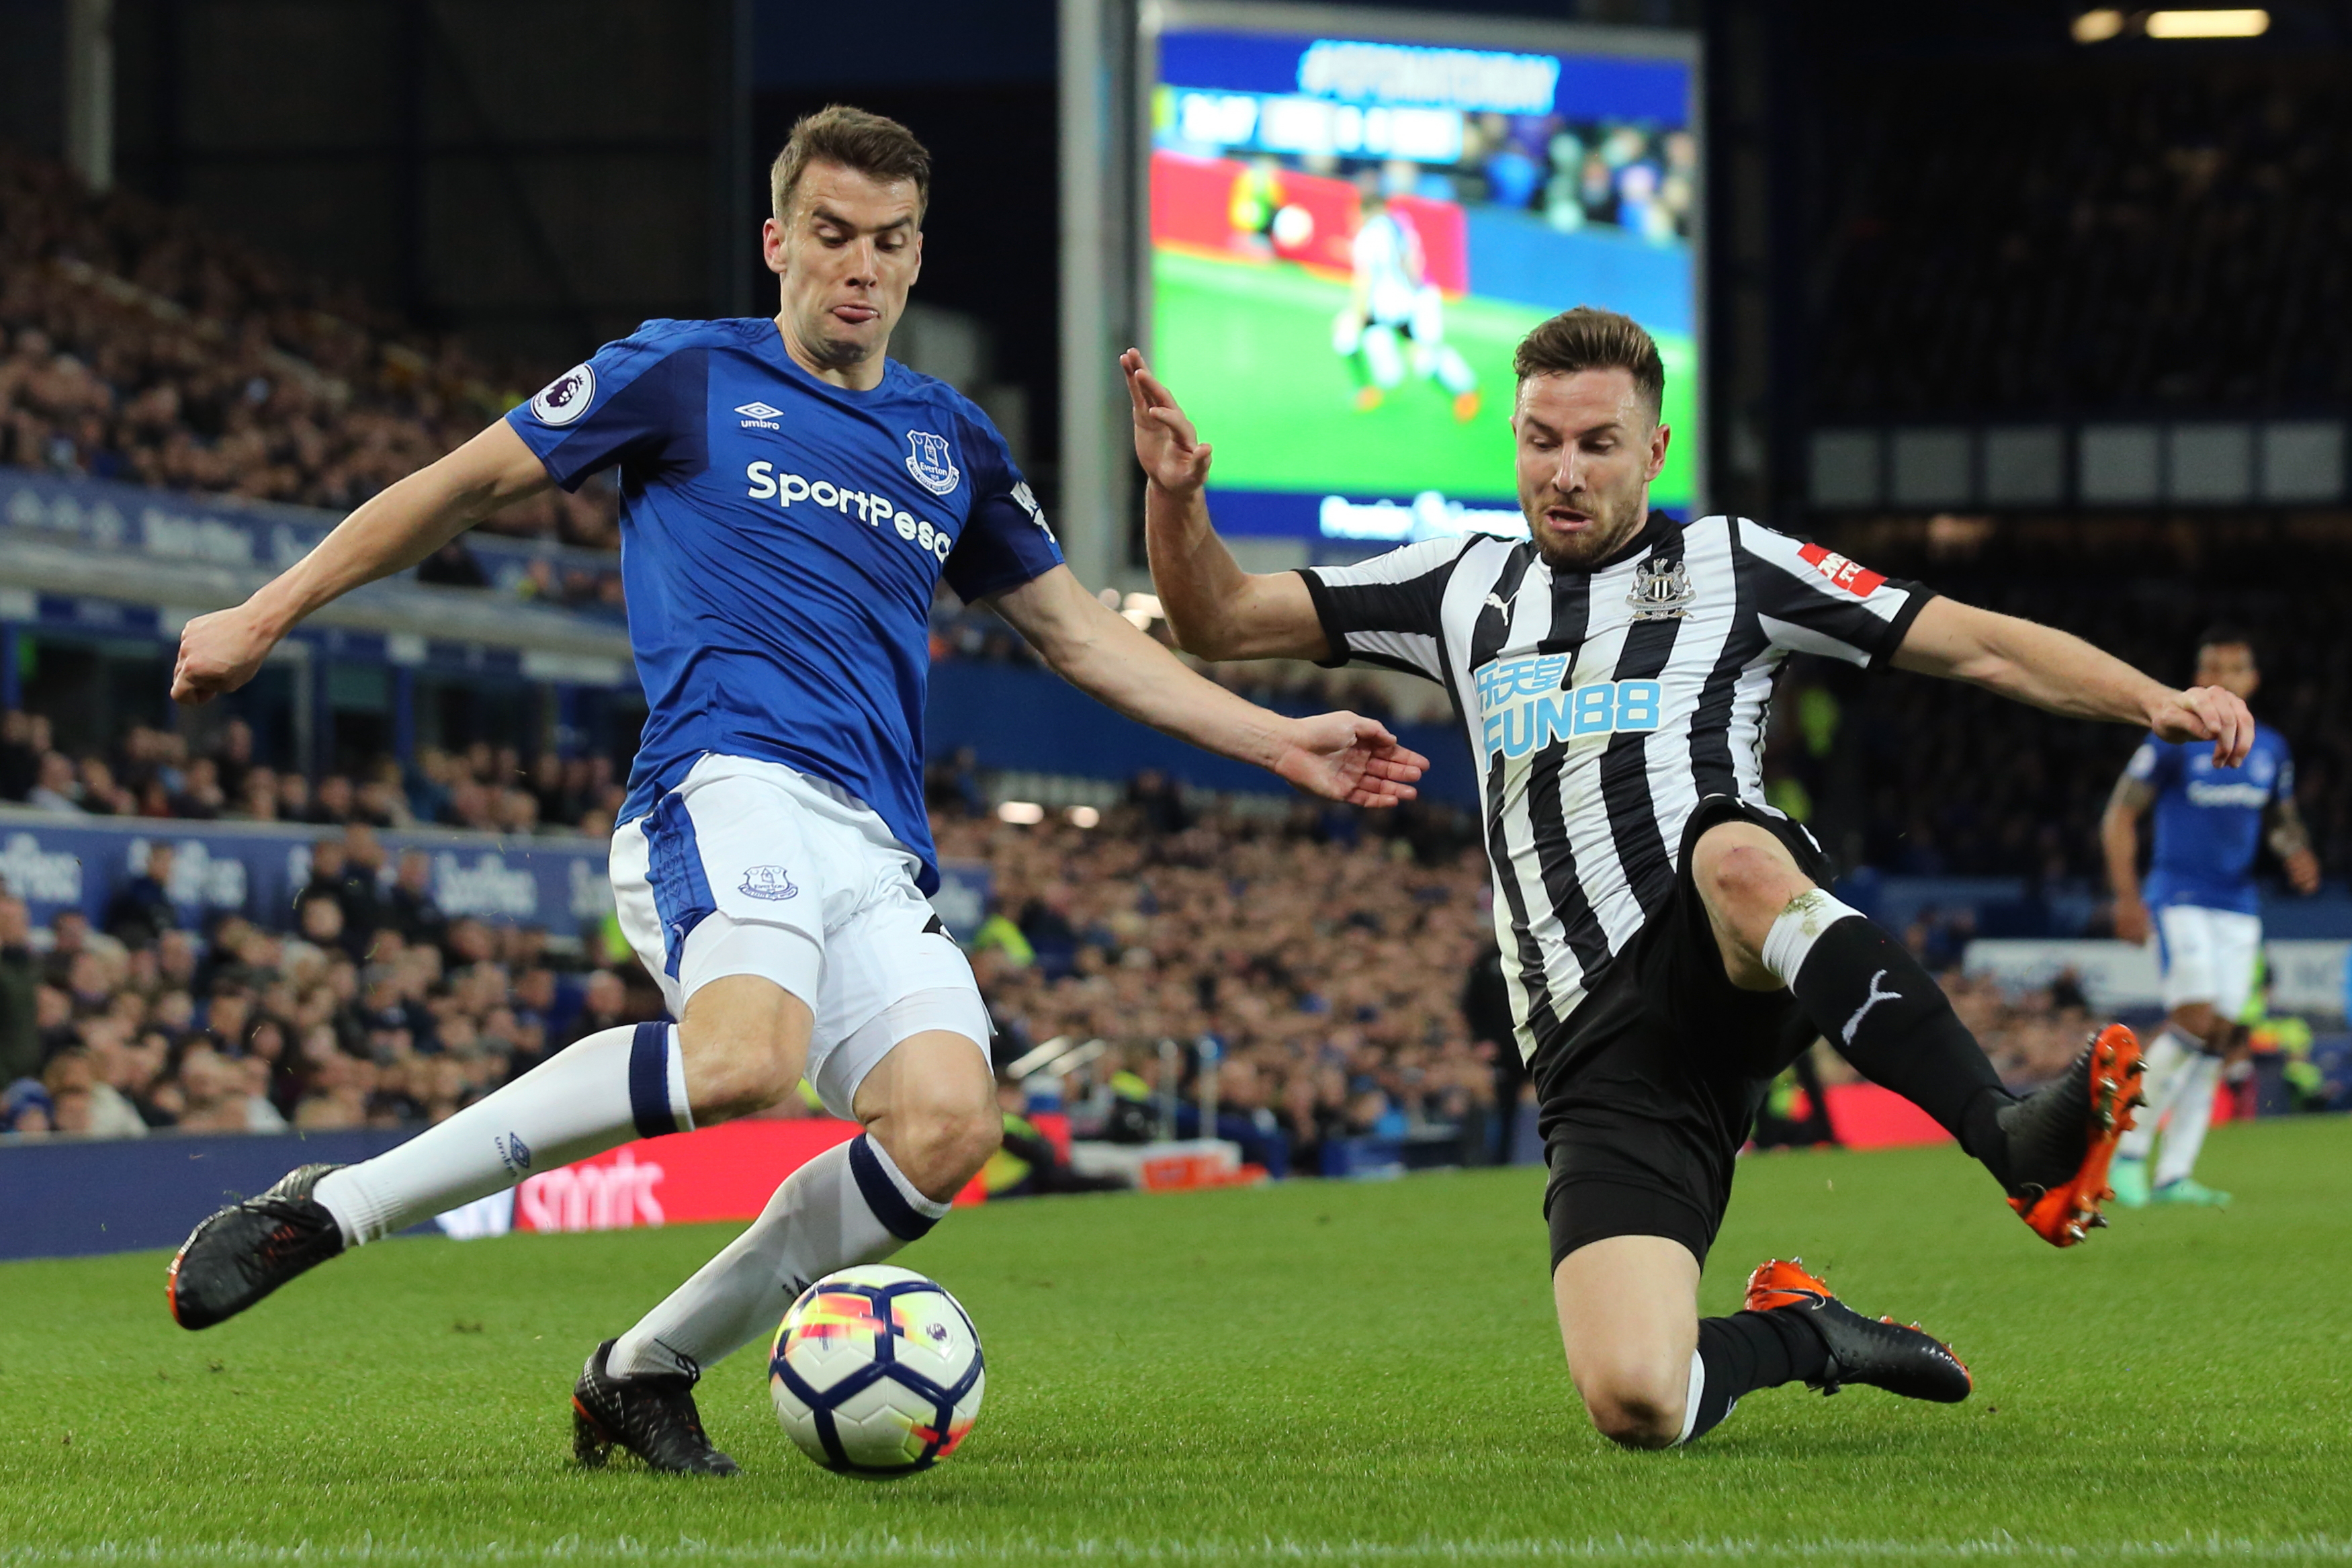 How we did on Nostra Pro as Everton beat Newcastle 1-0 at the Goodison